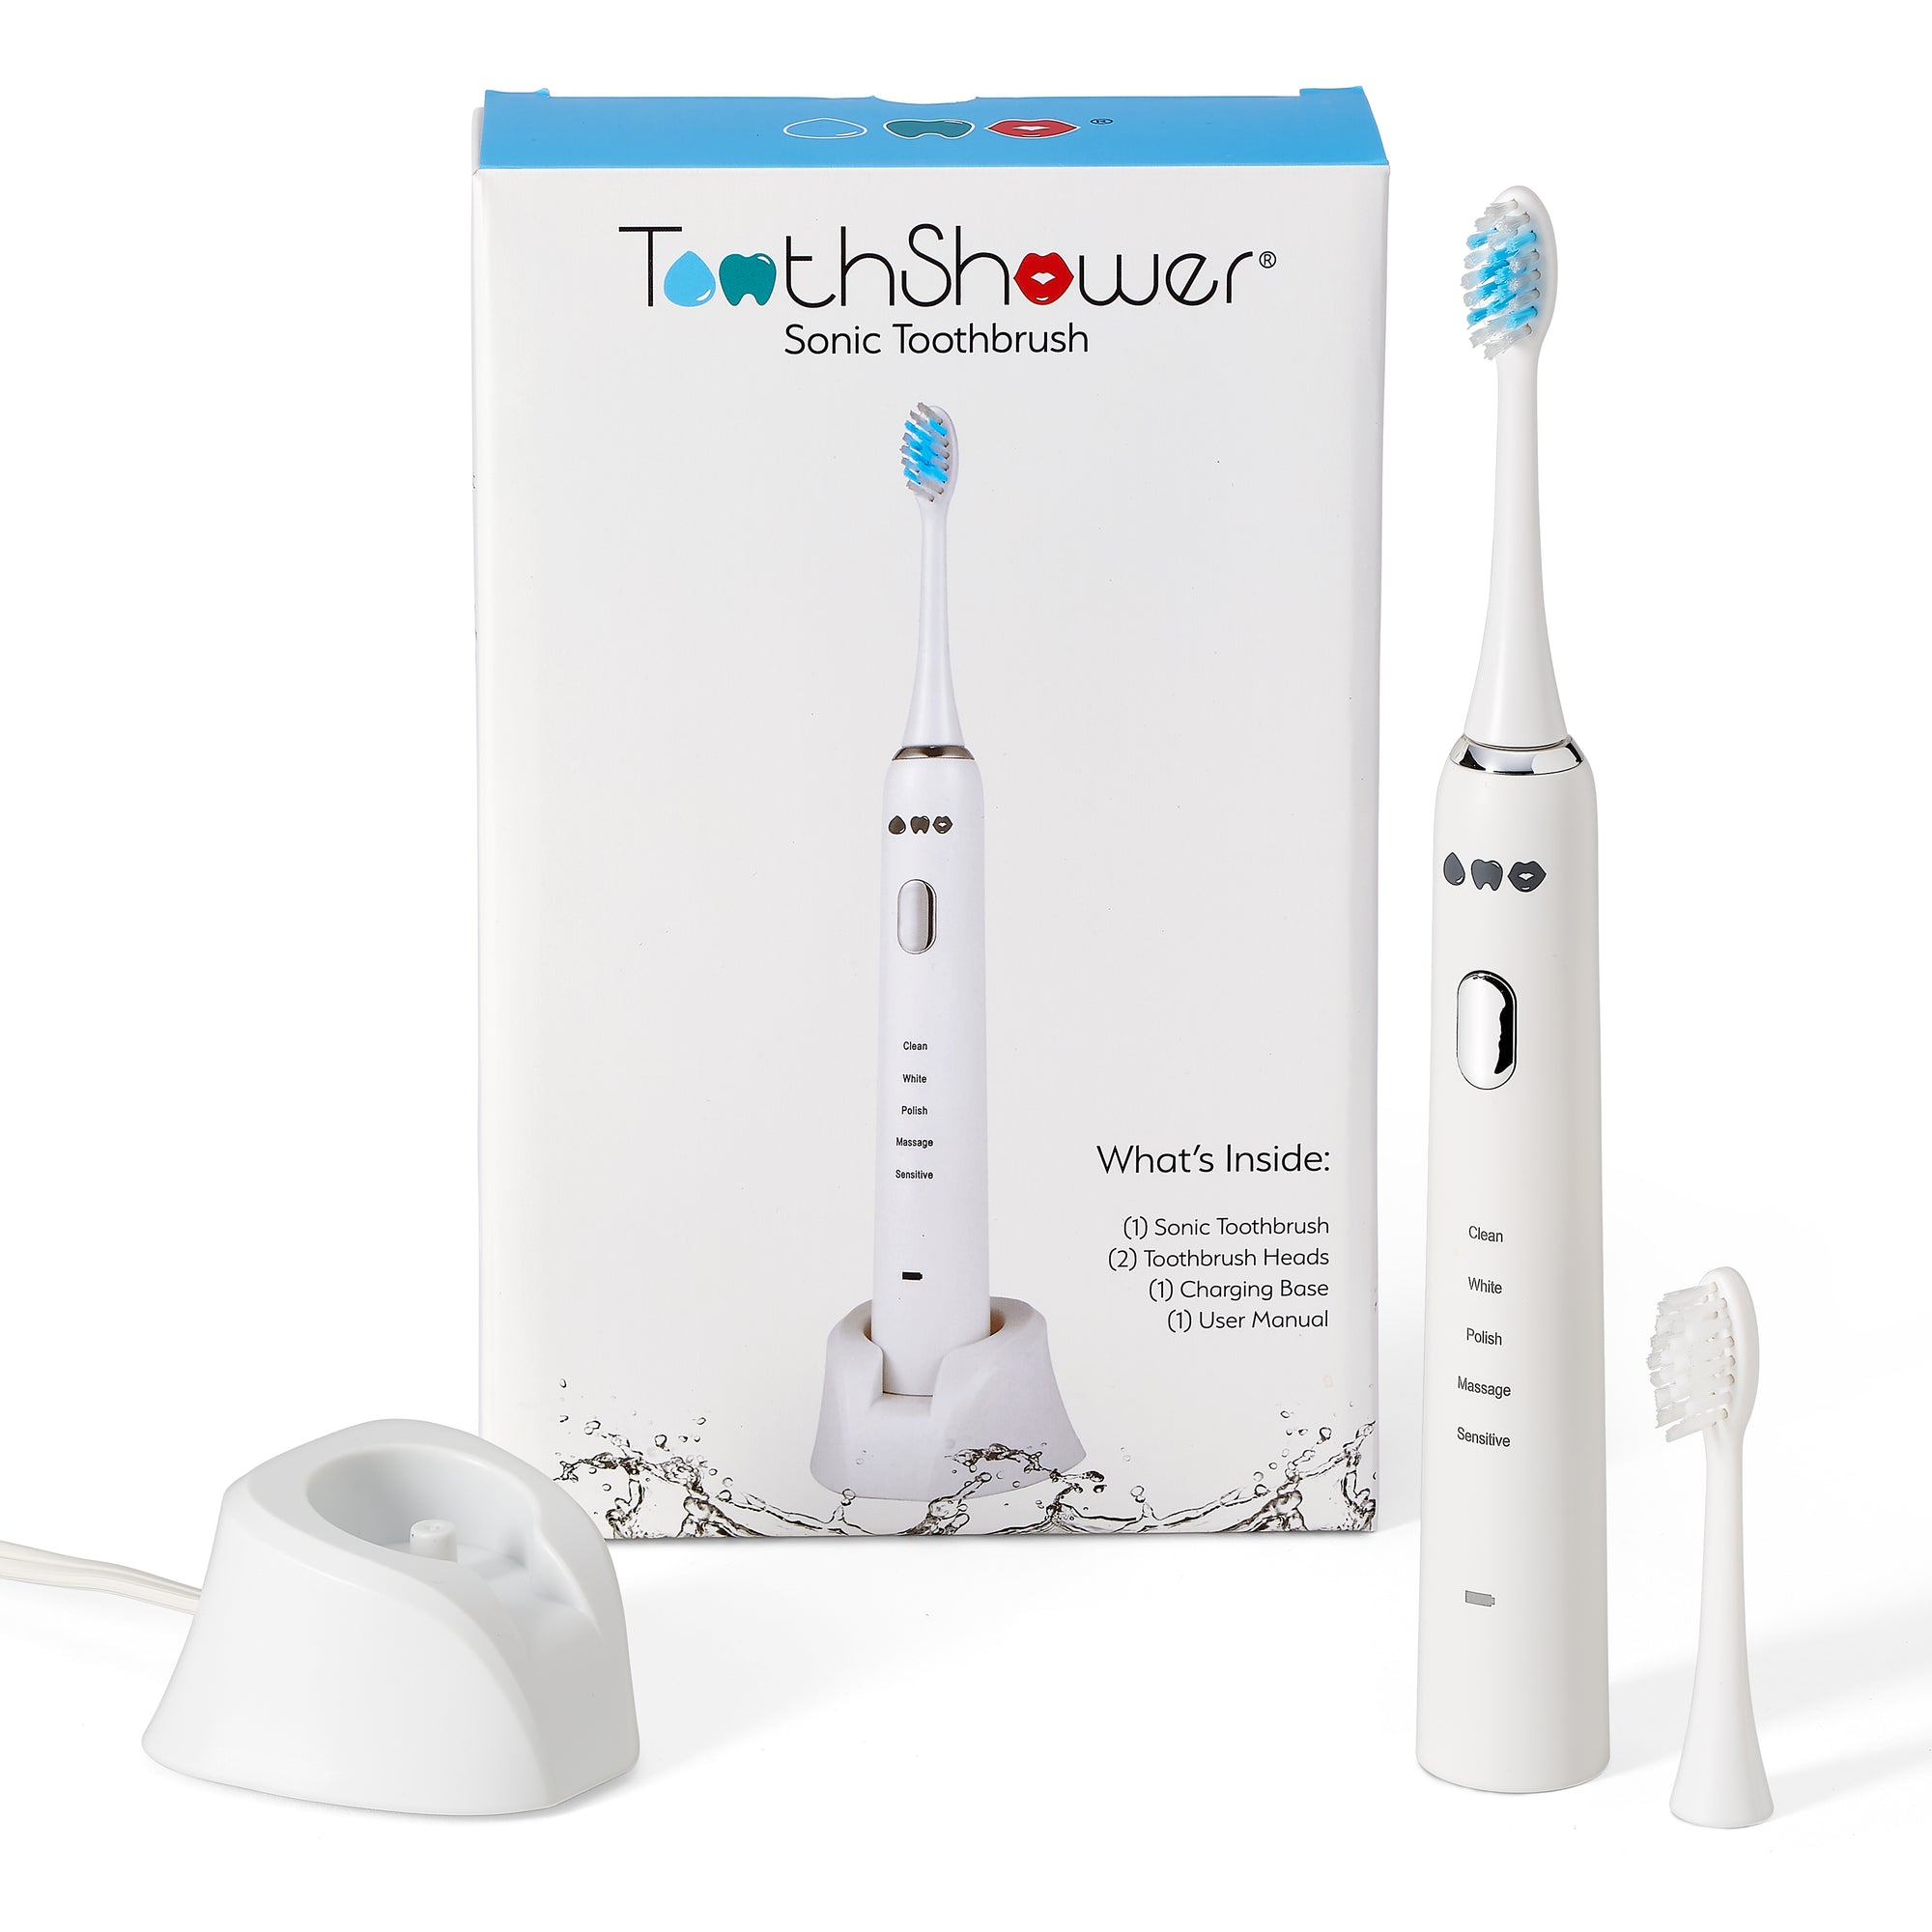 sleek attractive sonic toothbrush with recharge base and two sonic toothbrush heads